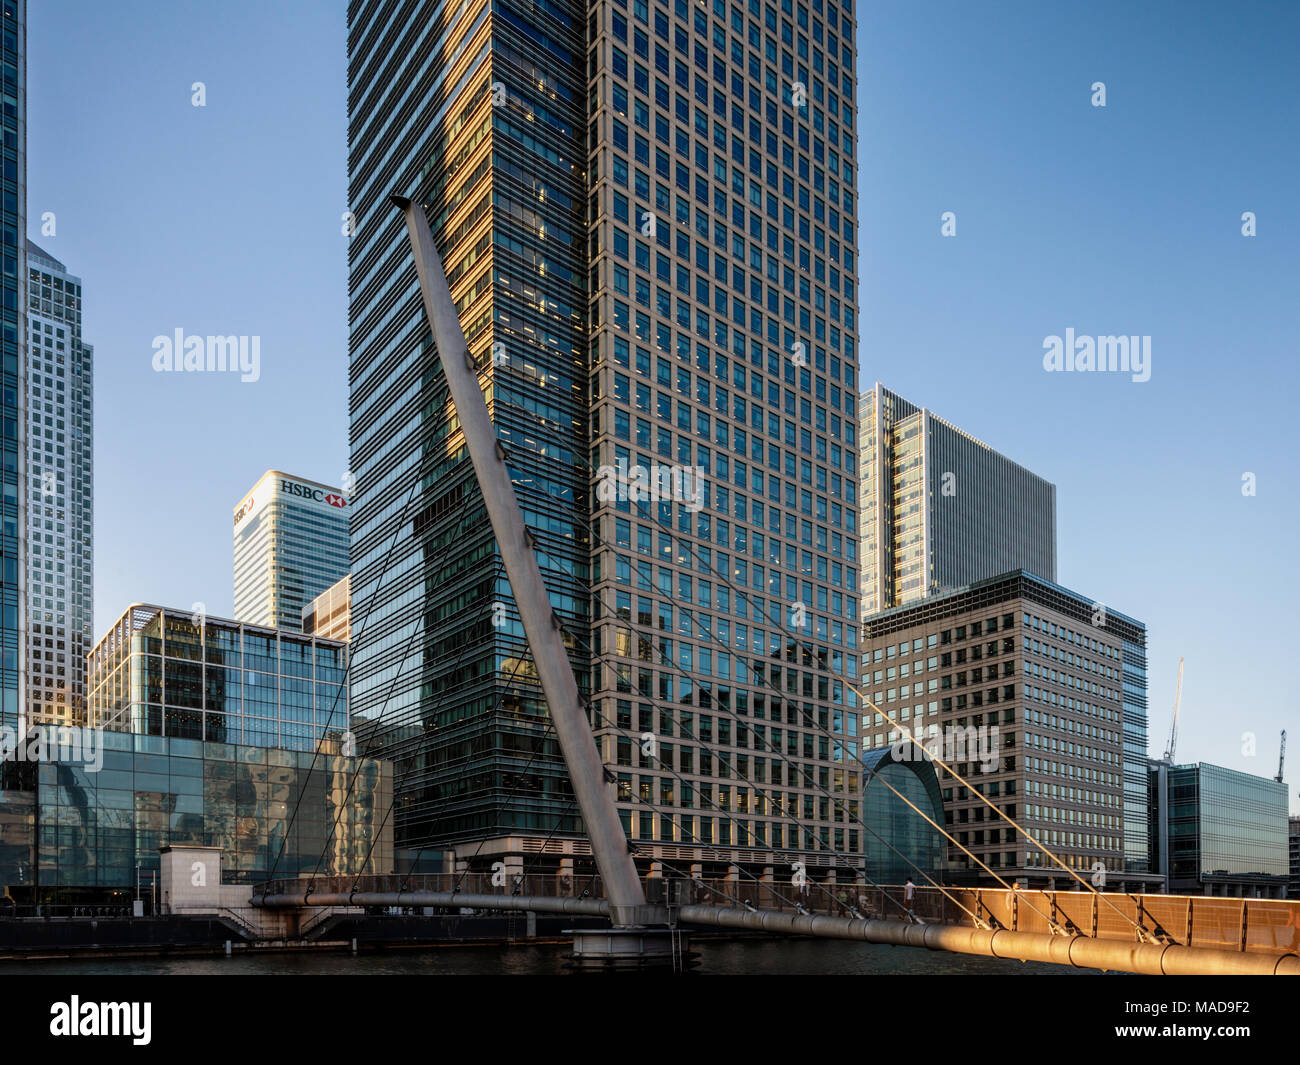 South Quay Footbridge, Canary Wharf, London. Linking the South Quay and Heron Quays in the Canary Wharf complex an amazing cable stayed footbridge. Stock Photo